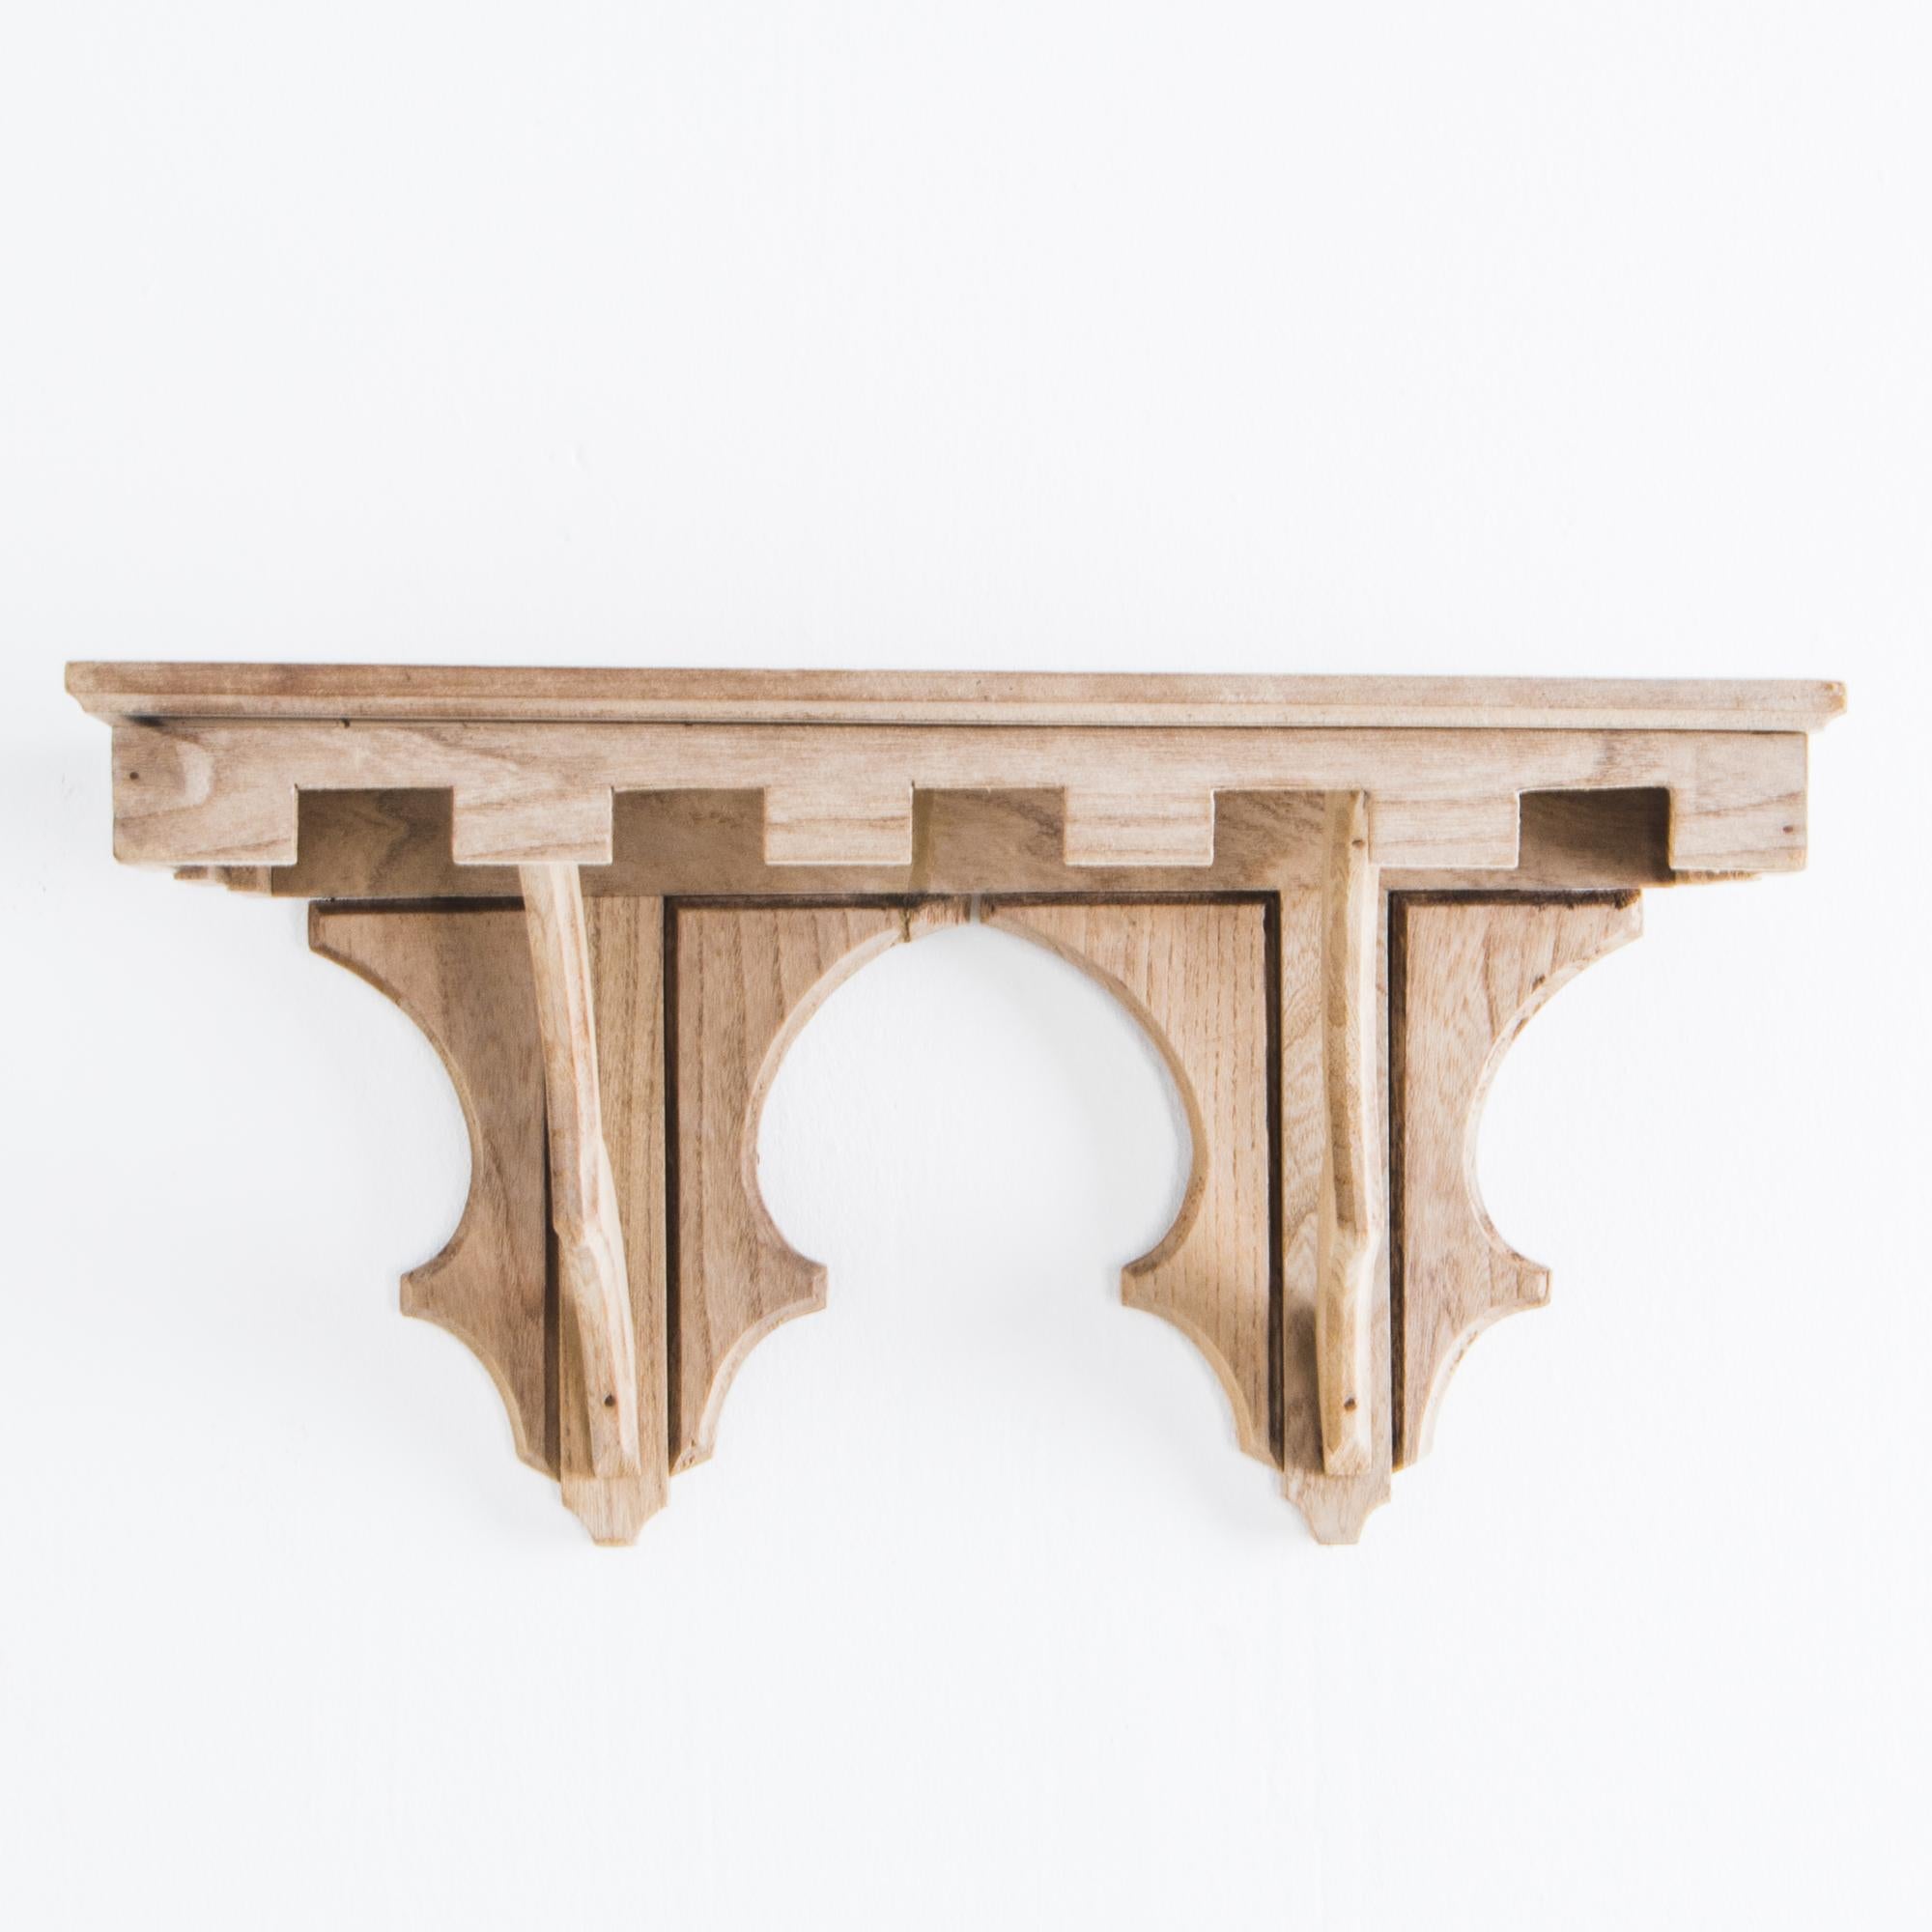 This wooden wall console from turn of the century Belgium has a striking Gothic design, featuring a decorative crenellated apron and peaked, buttress-style struts. Made of oak and recently restored to a light understated finish. This wall console is